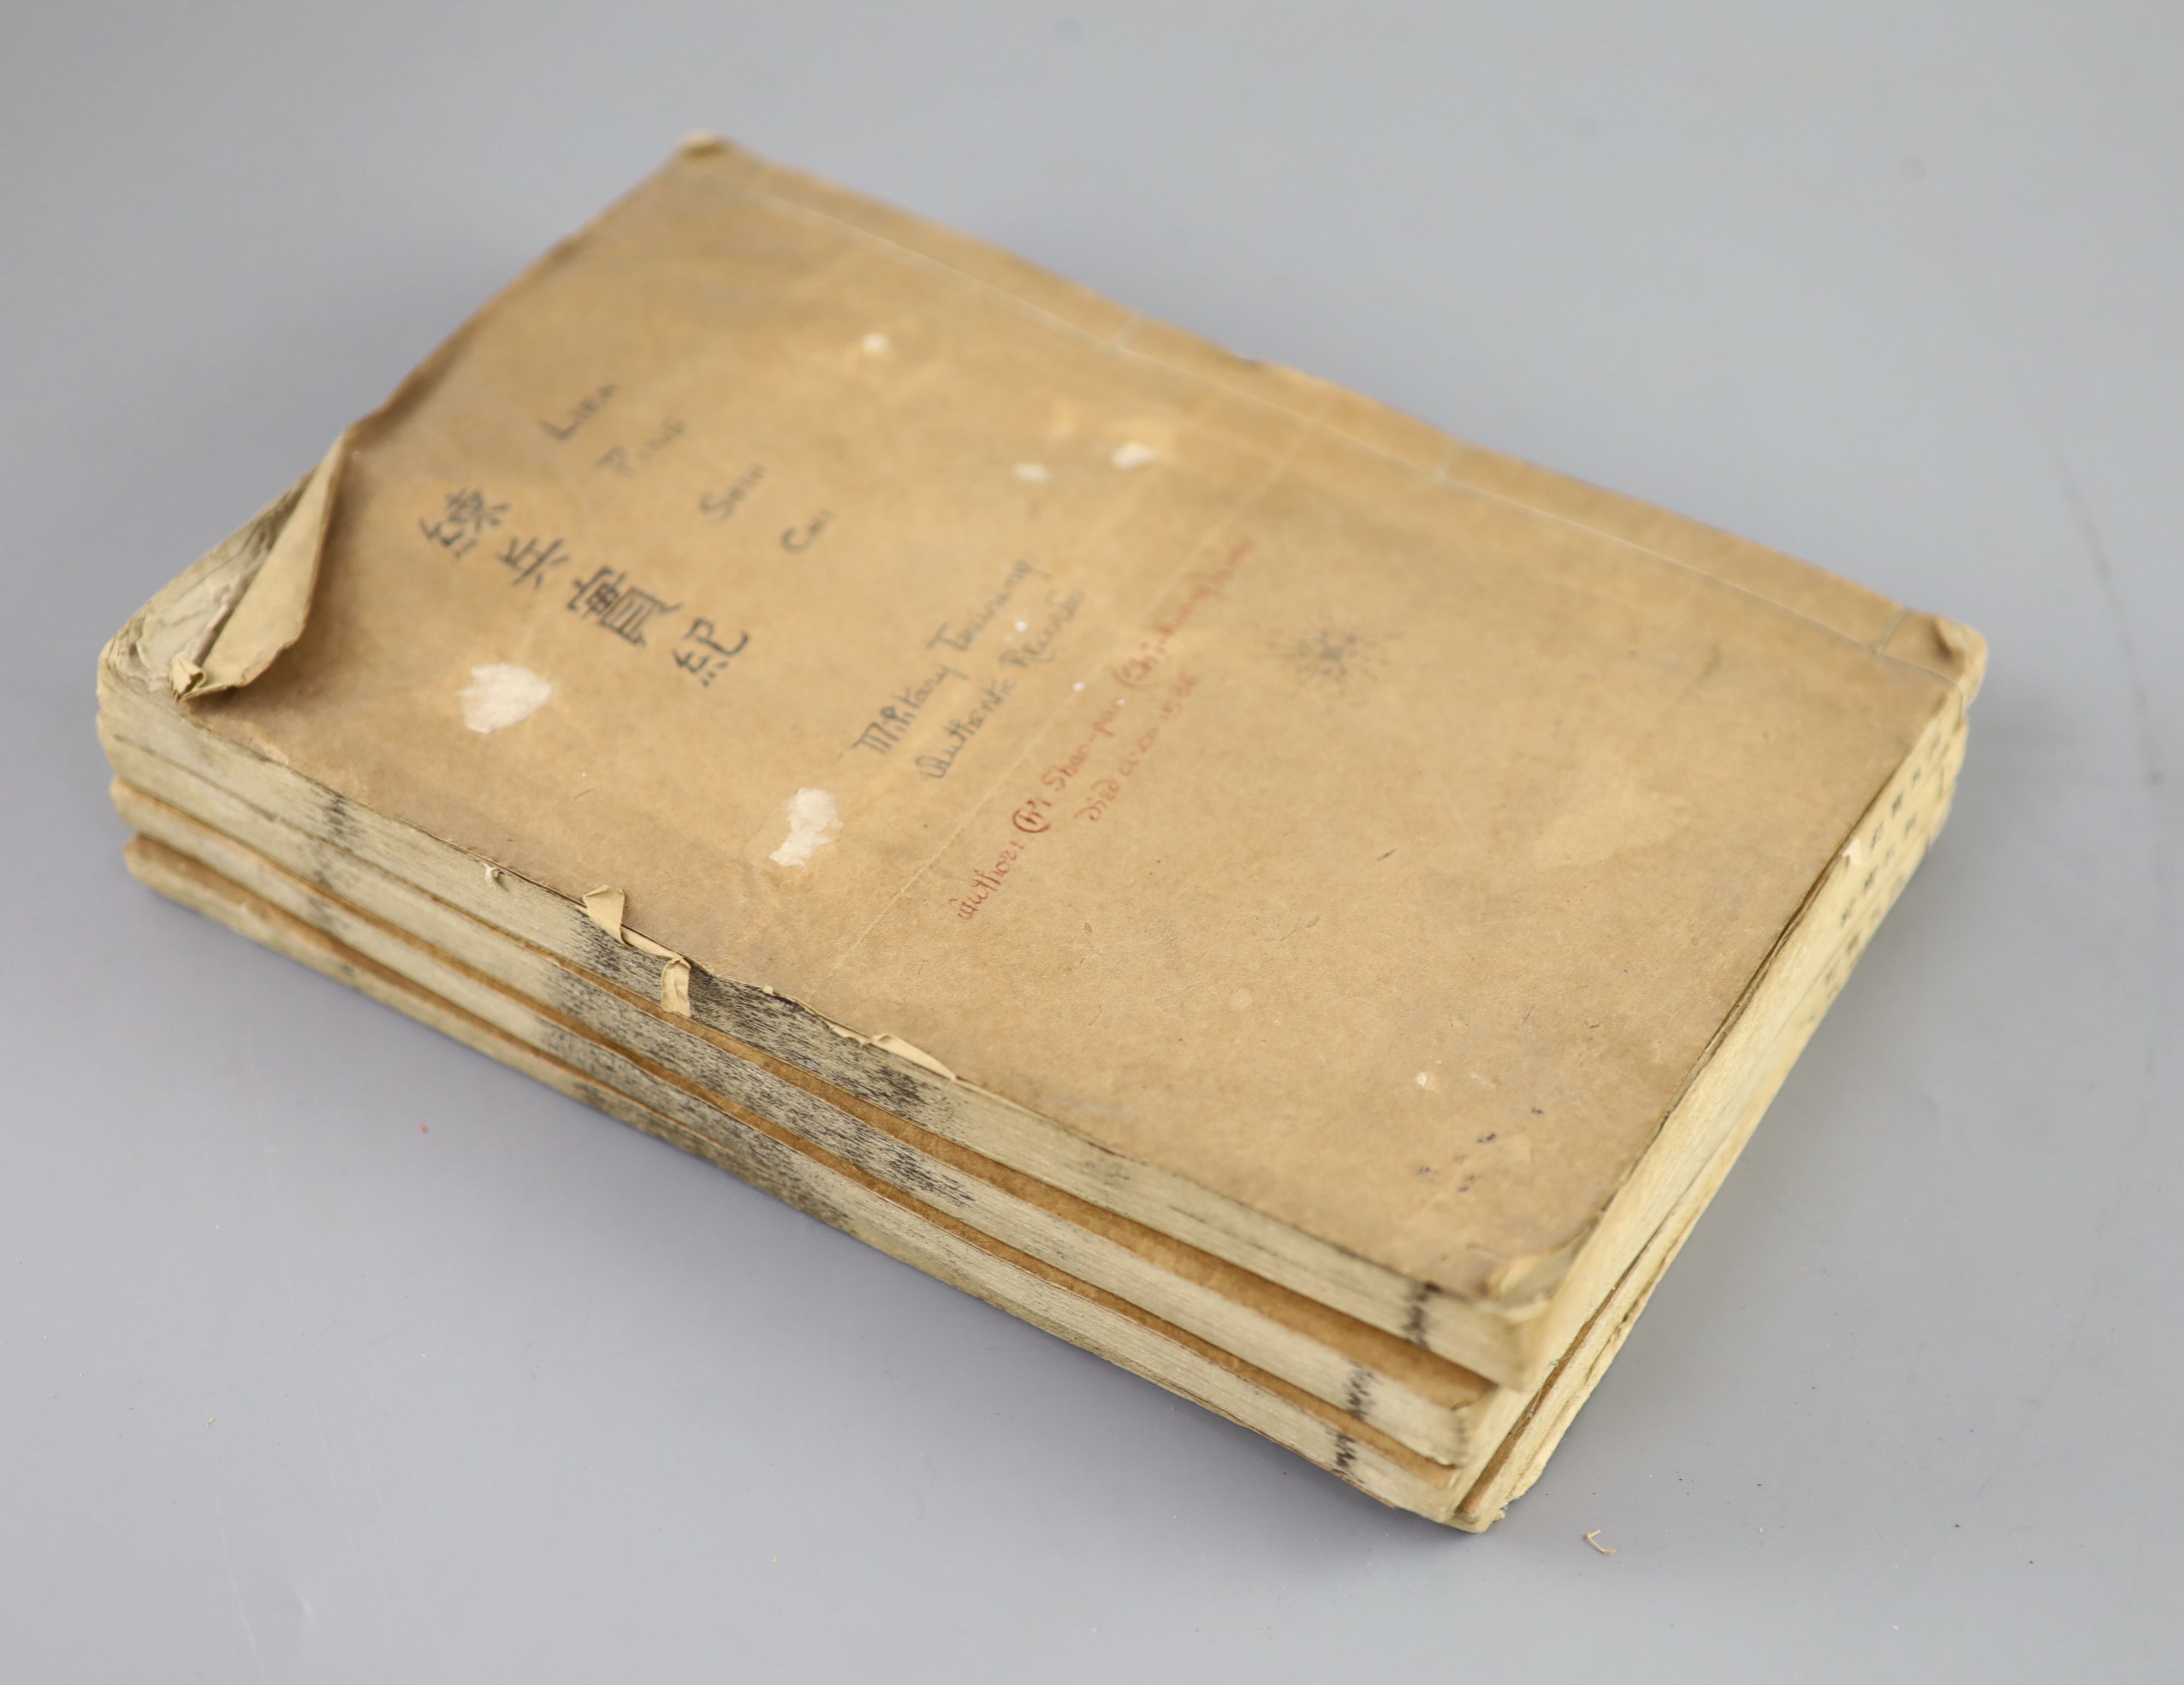 Chinese book, Jiguang Qi, Military Training: Authentic Records Lien ping shih chi, undated but probably Qing dynasty, Provenance - A.